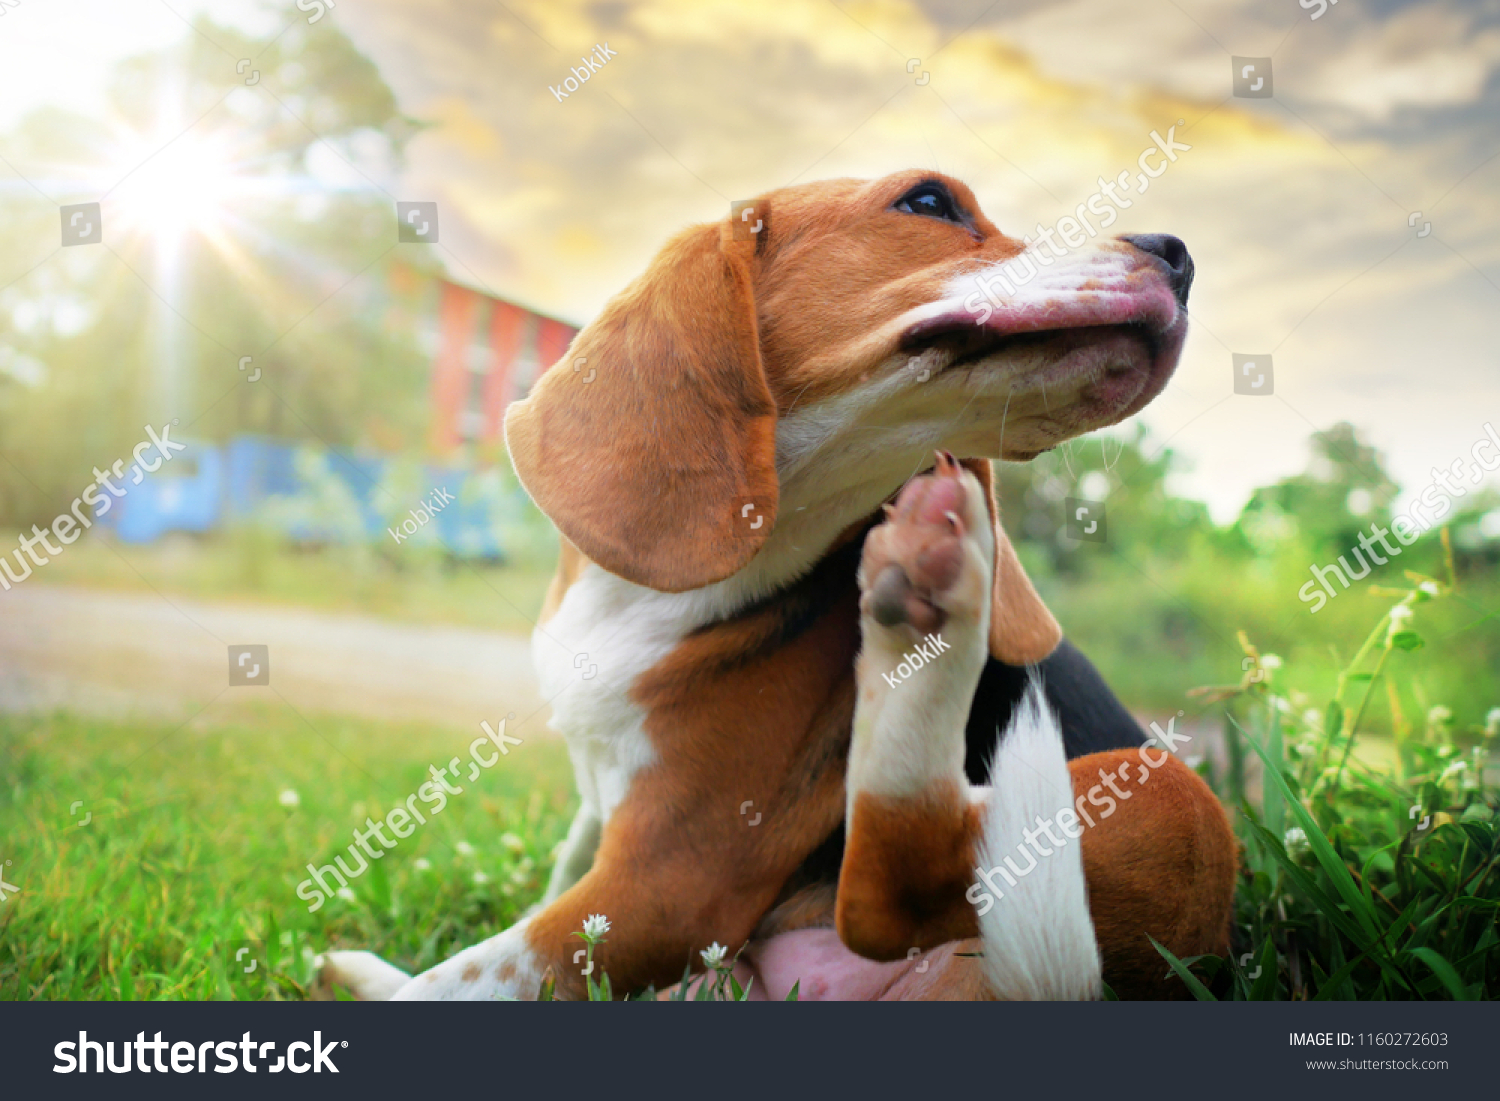 Beagle dog scratching body on green grass outdoor in the park on sunny day. #1160272603